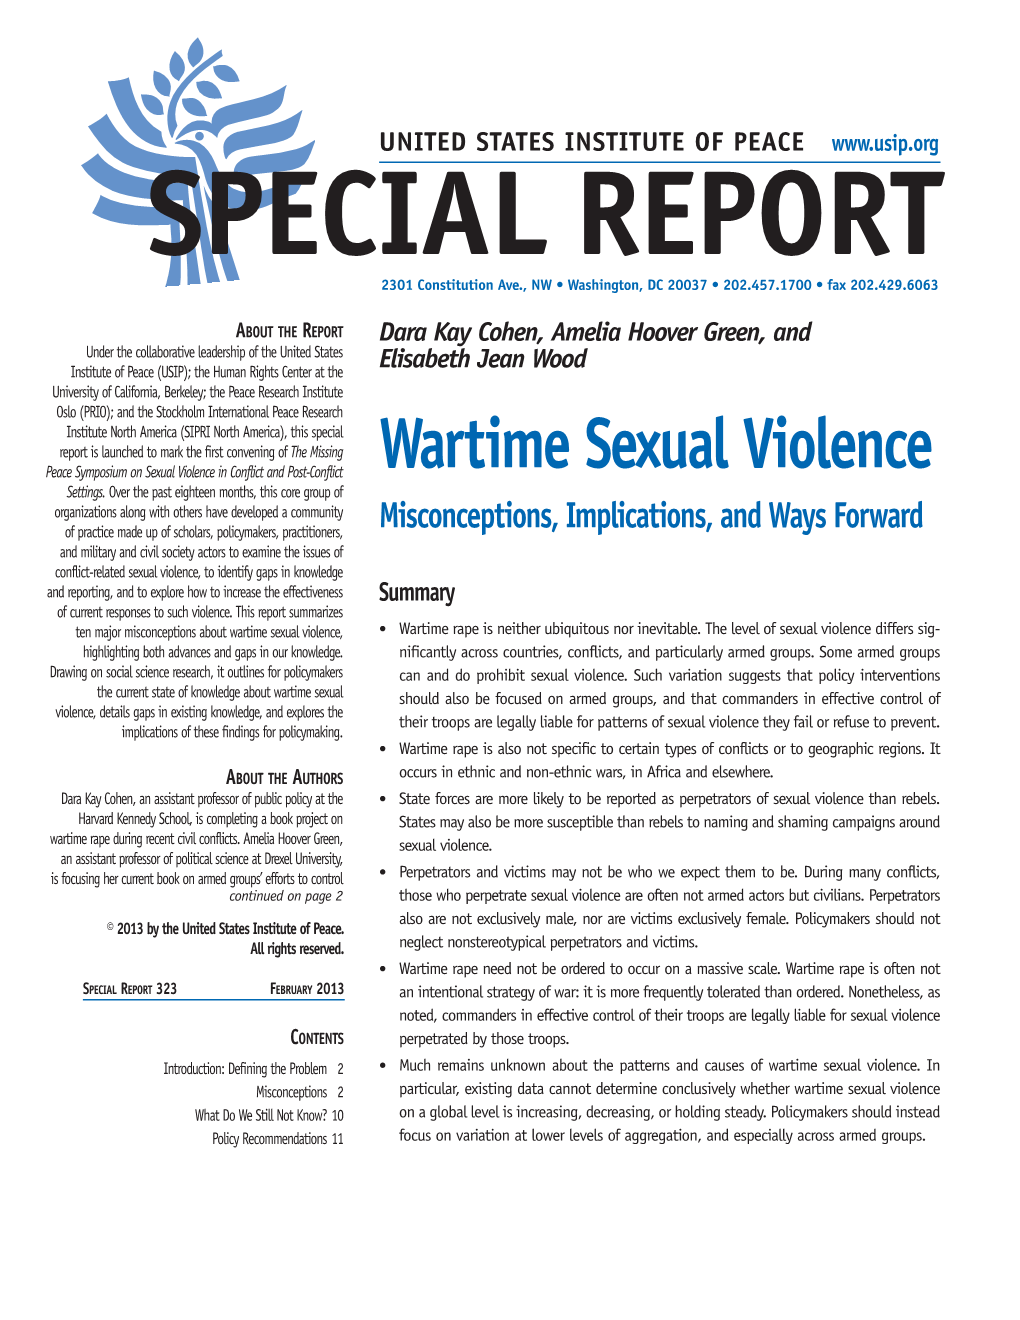 Wartime Sexual Violence Settings